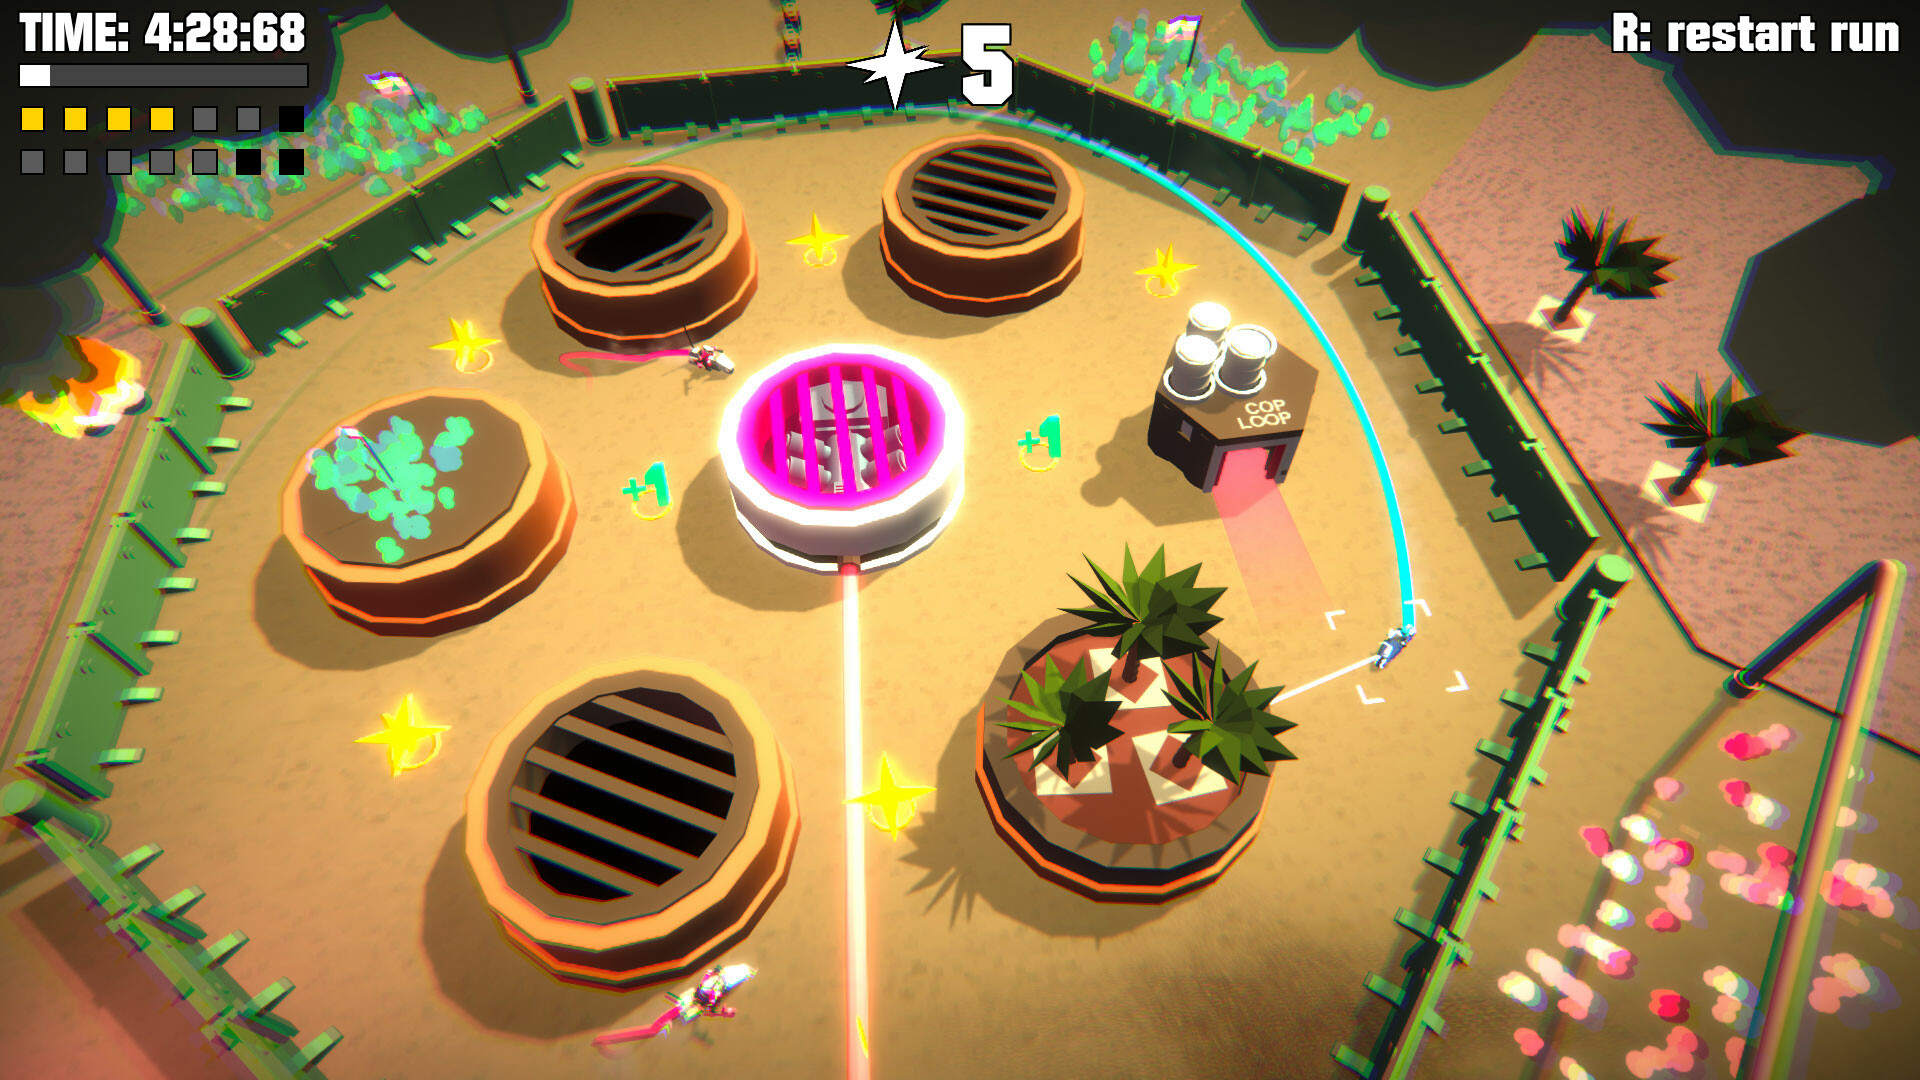 Skelittle: A Giant Party!!, PC Steam Jogo